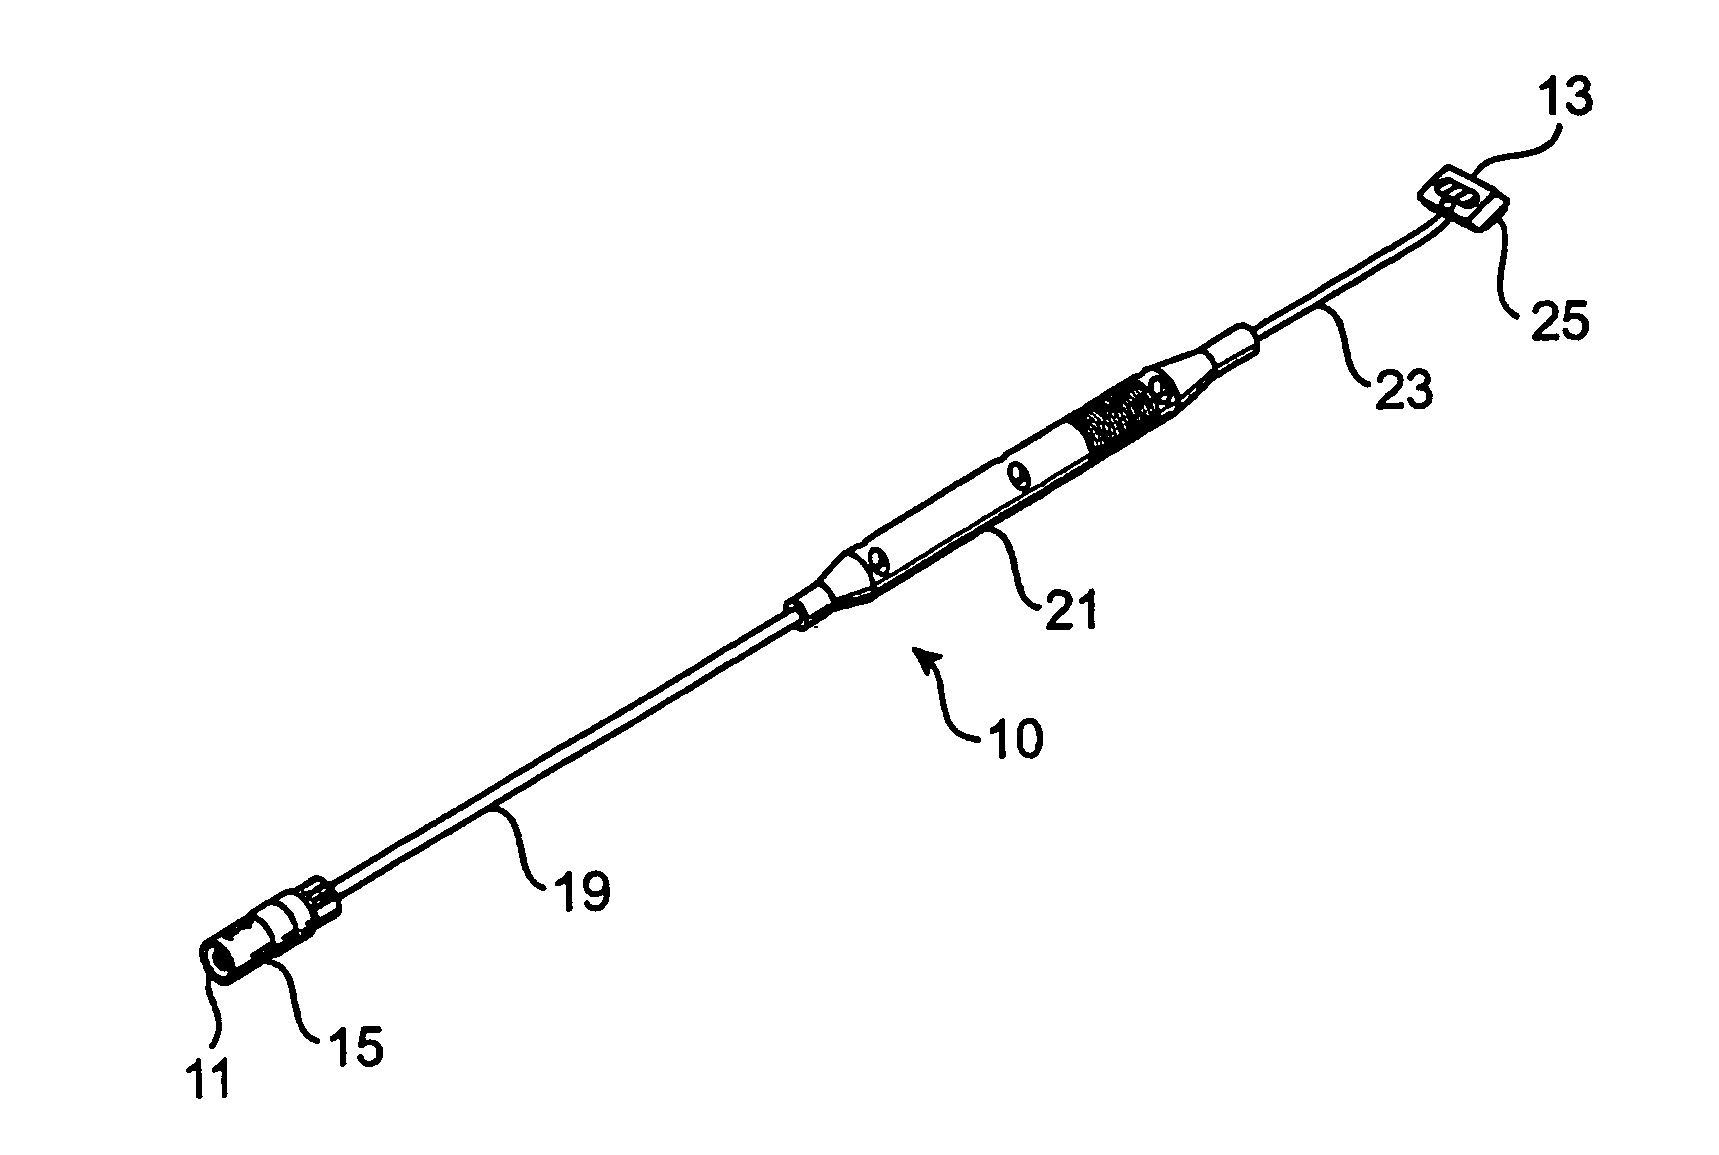 Device for shaping infarcted heart tissue and method of using the device